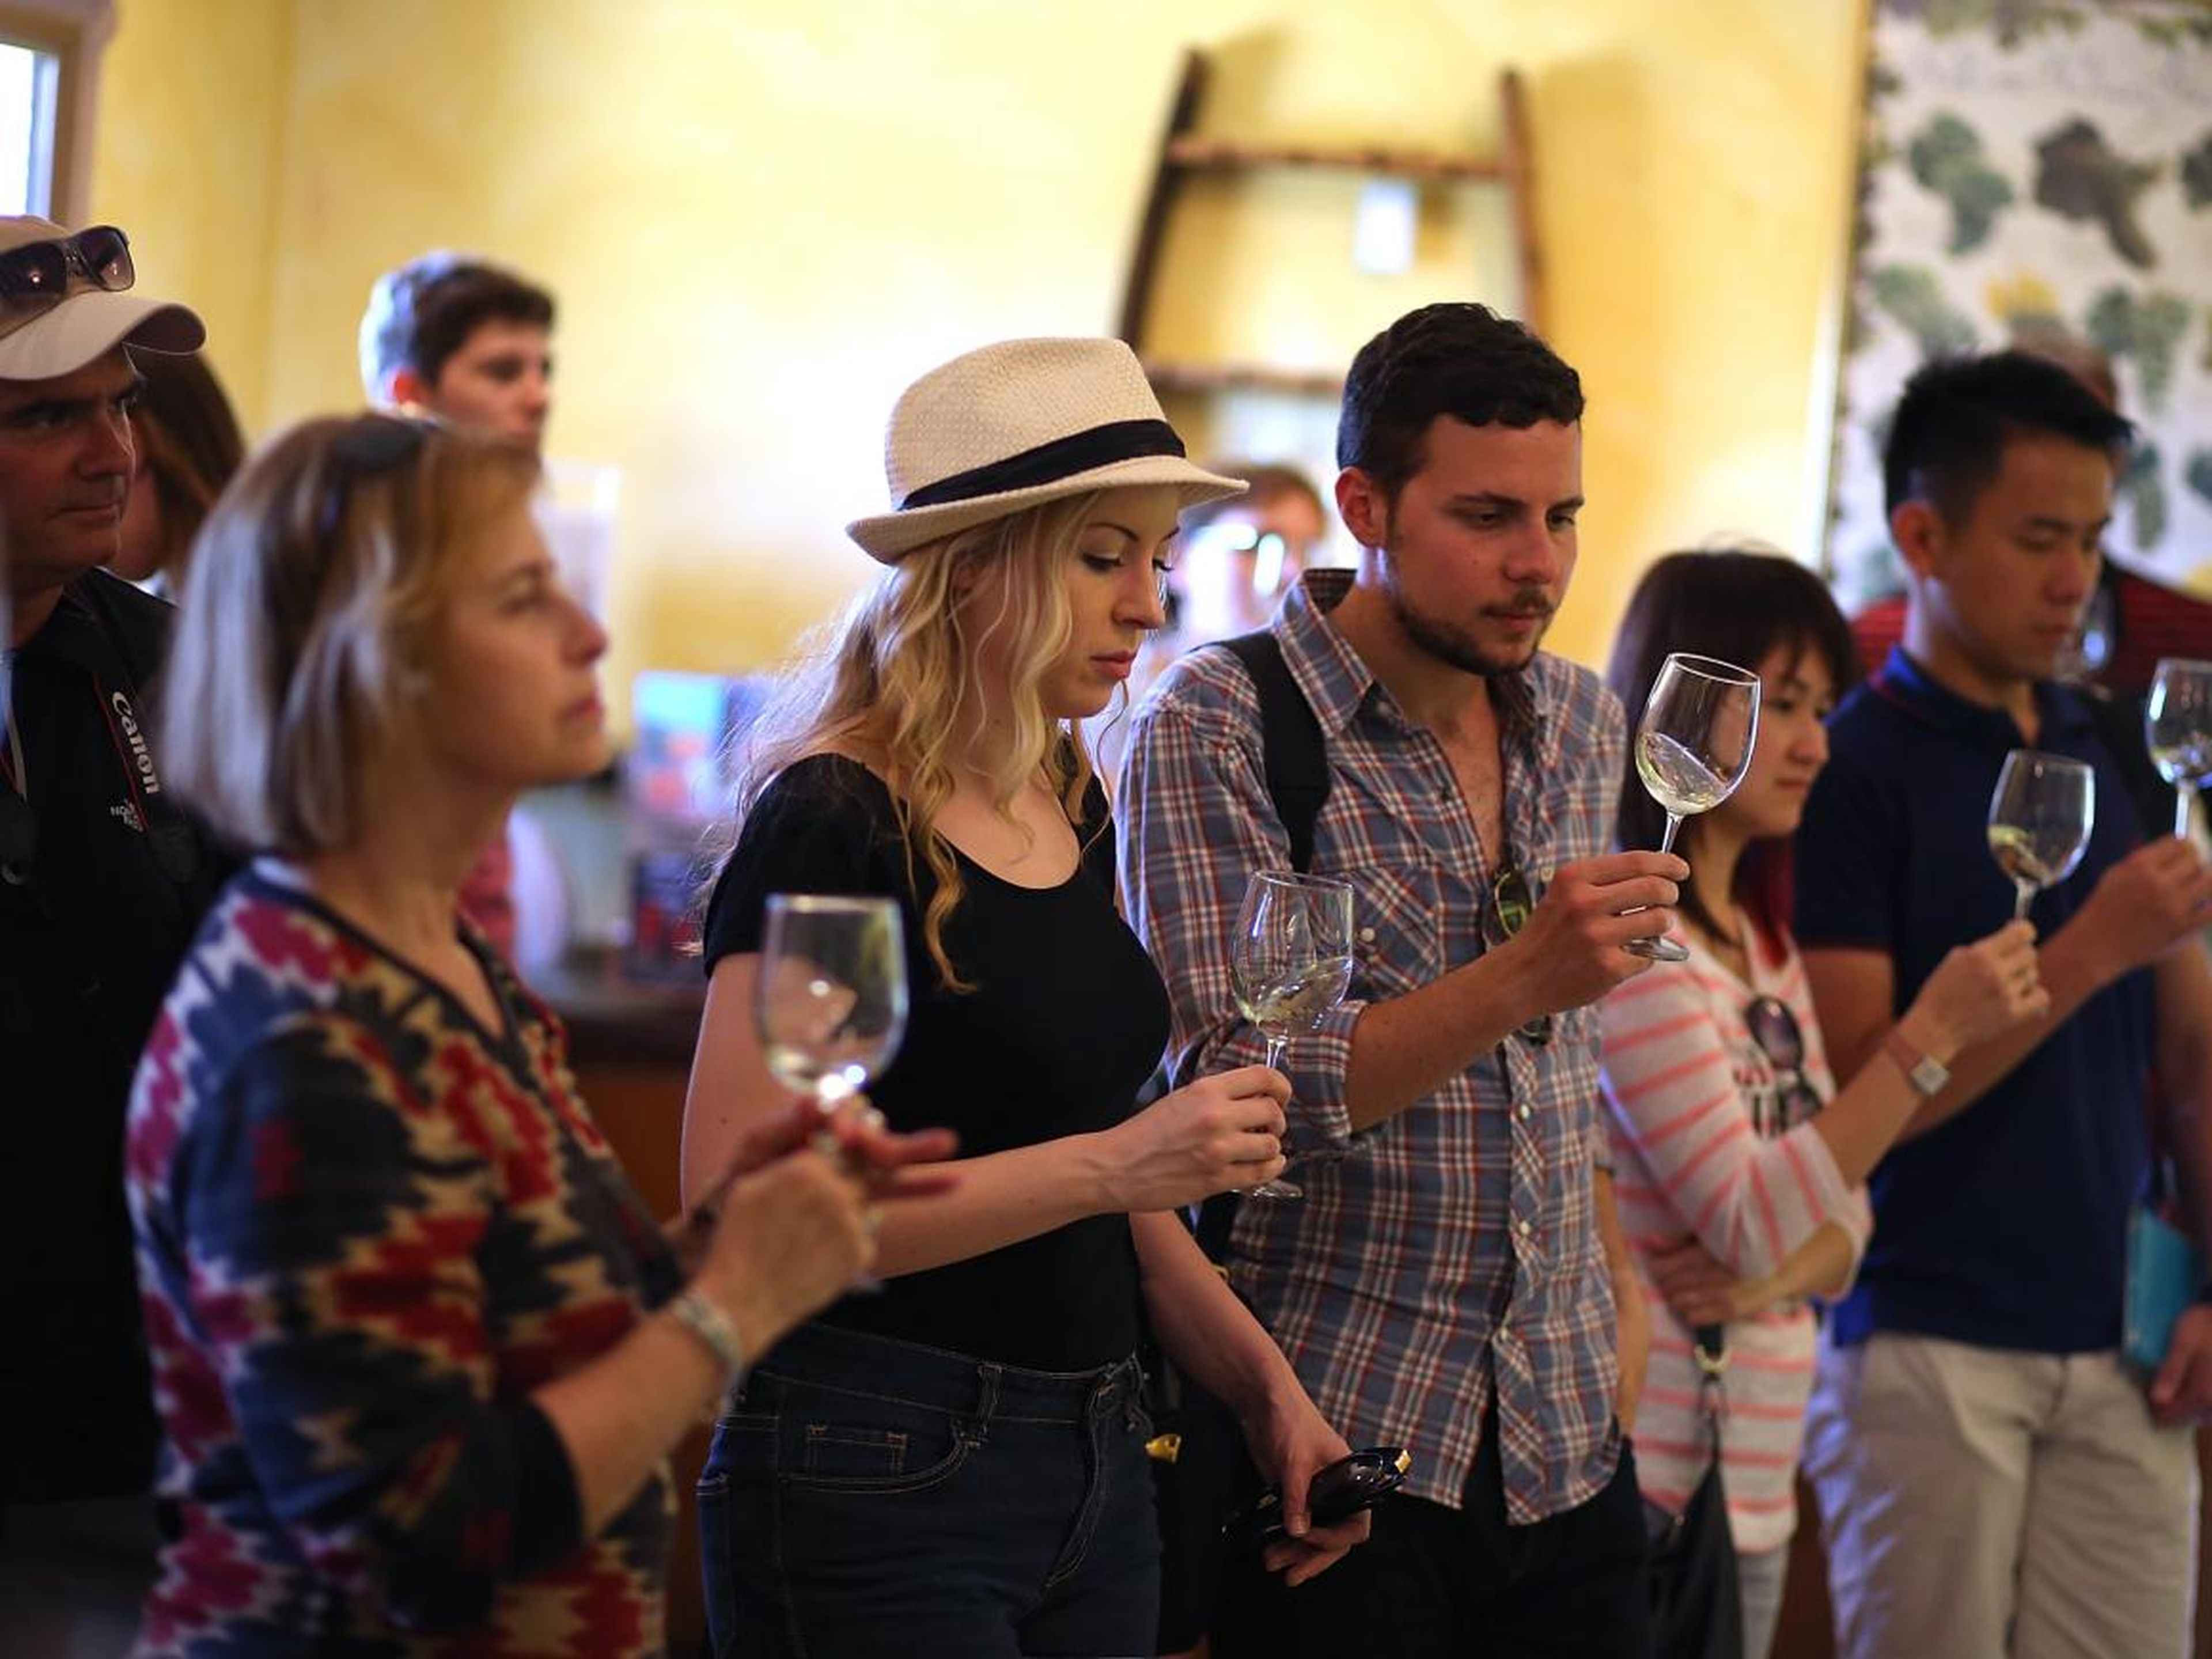 But with its more than three million visitors per year, Napa can quickly get overcrowded and overpriced. Wine tastings in the region have traditionally cost between $5 and $50, but high-brow tastings in swanky venues that cost up